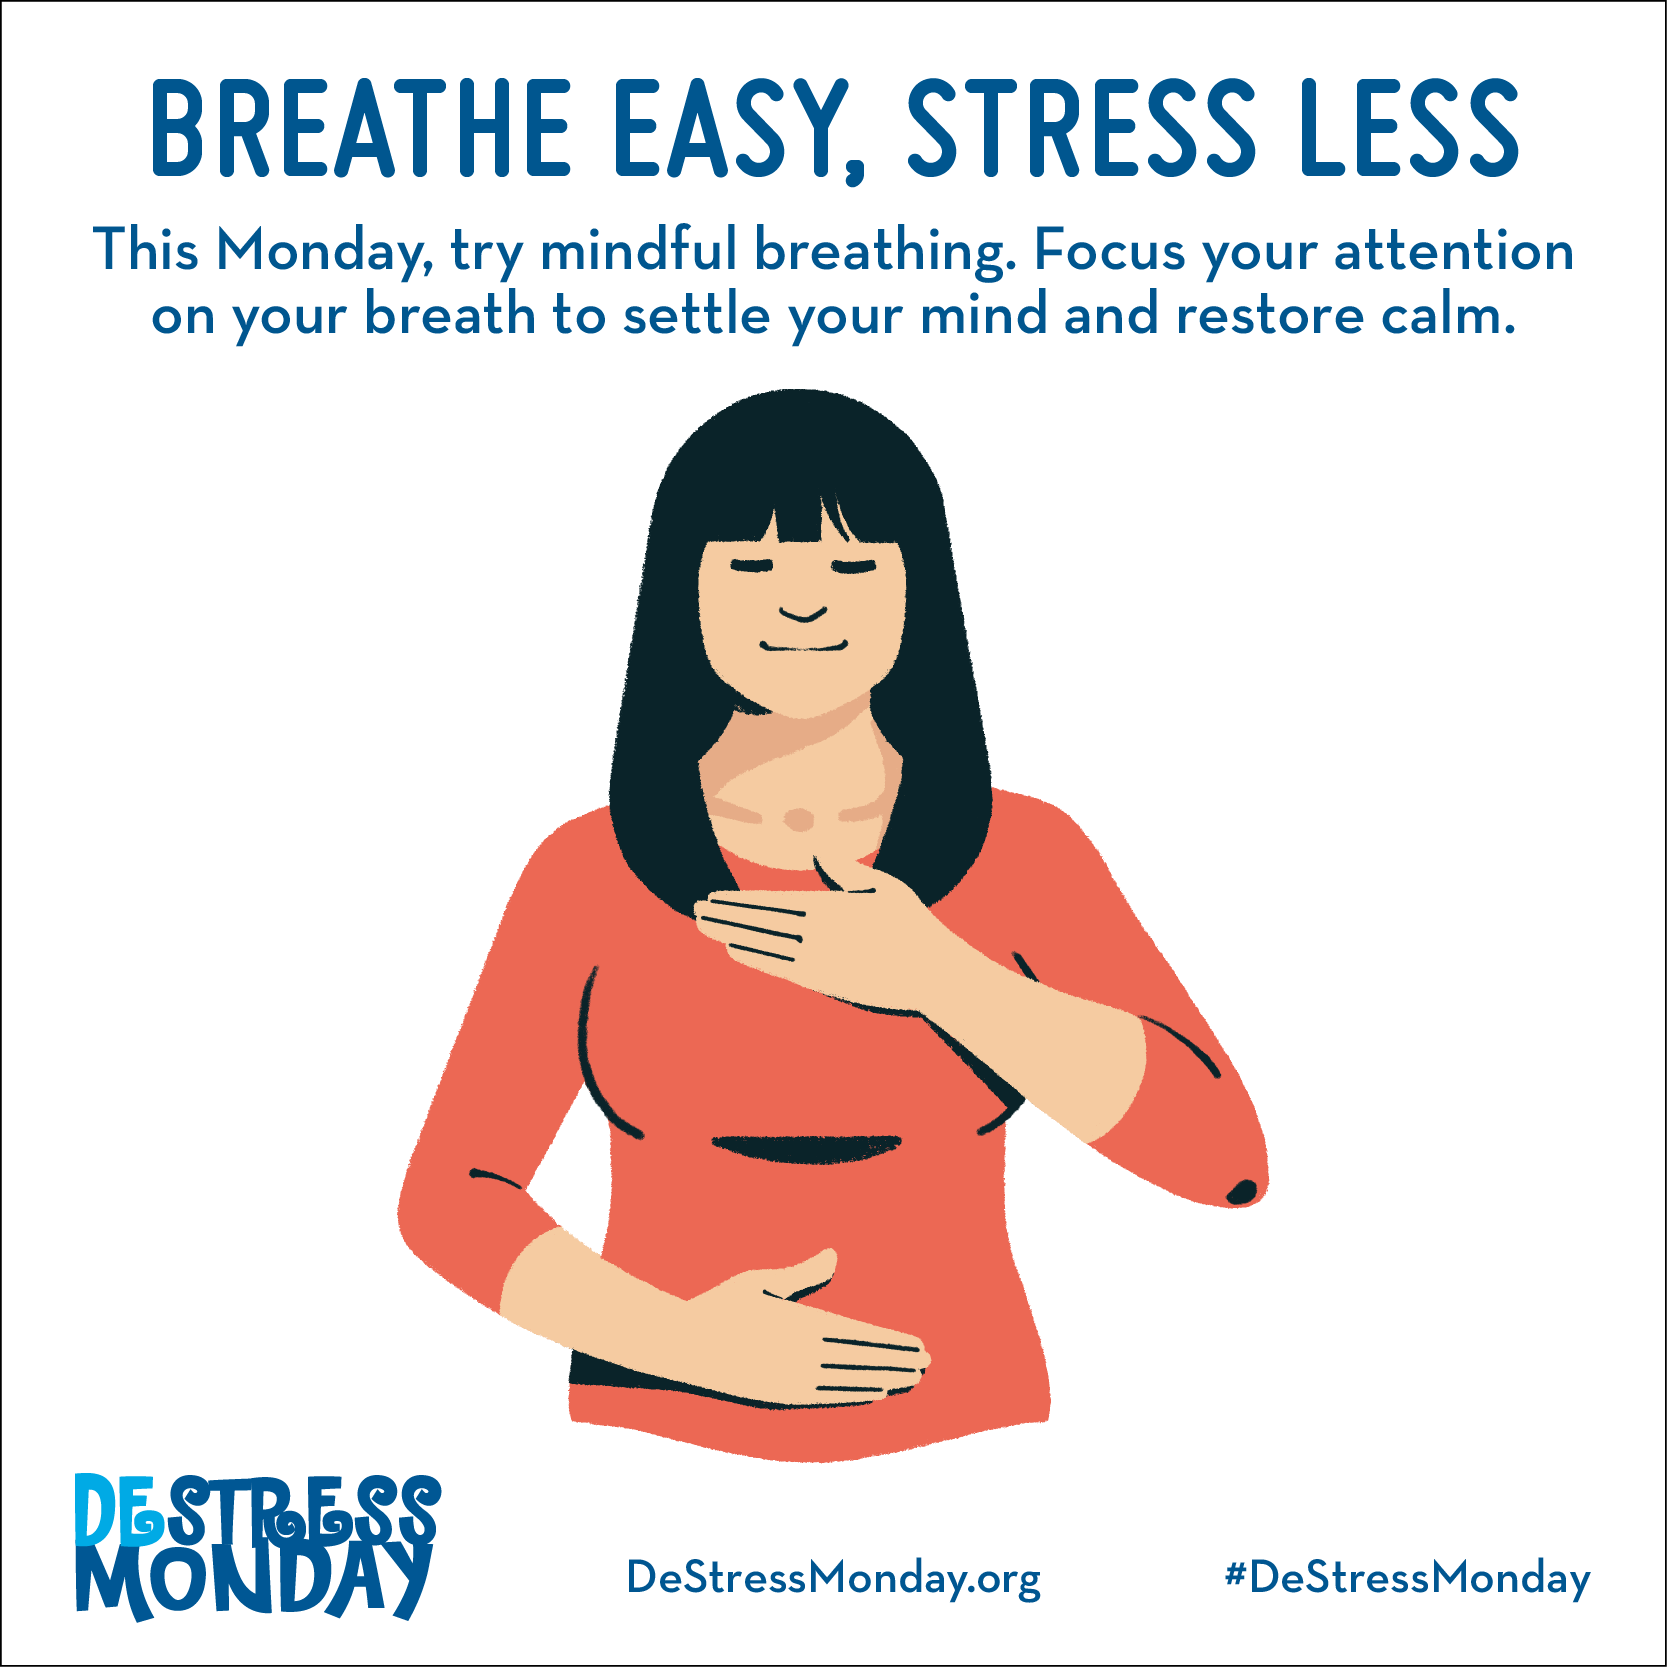 https://www.mondaycampaigns.org/wp-content/uploads/2020/03/destress-monday-breathing-graphic-mindful.png